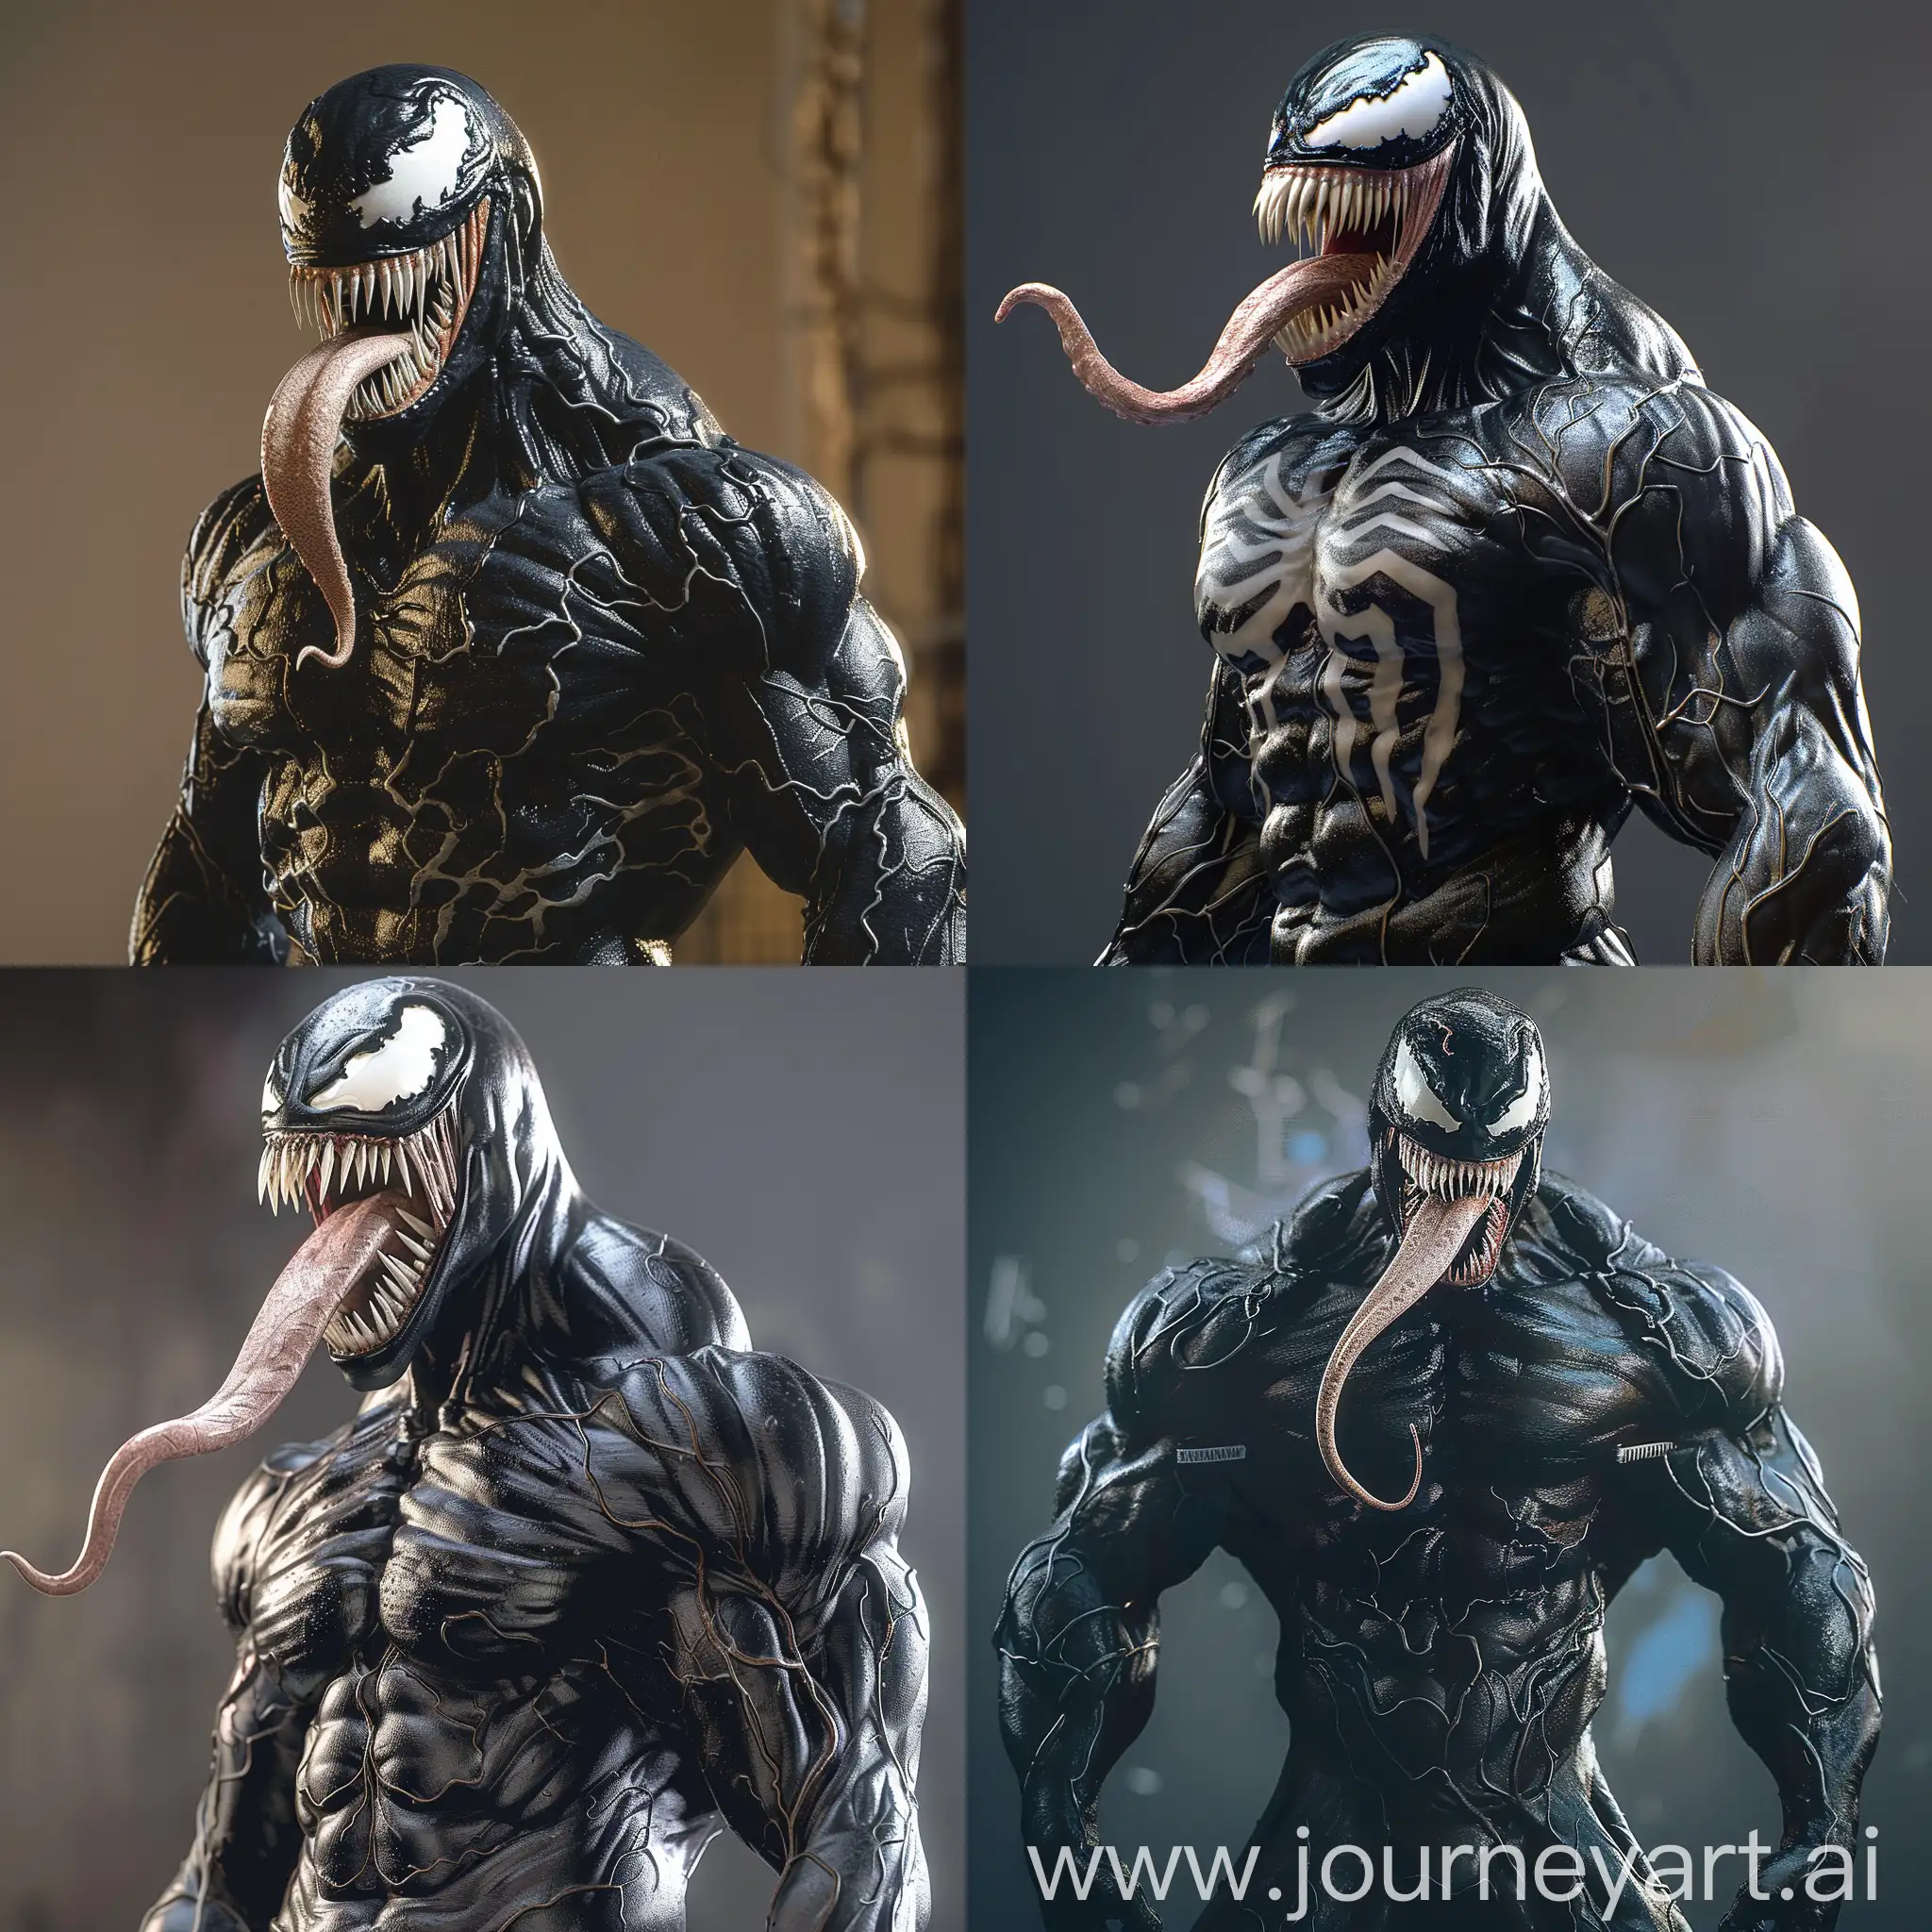 Bodybuilder Venom (Marvel Comics), defined muscles, with his huge, pointed tongue sticking out, realistic, 4k, hd, best quality